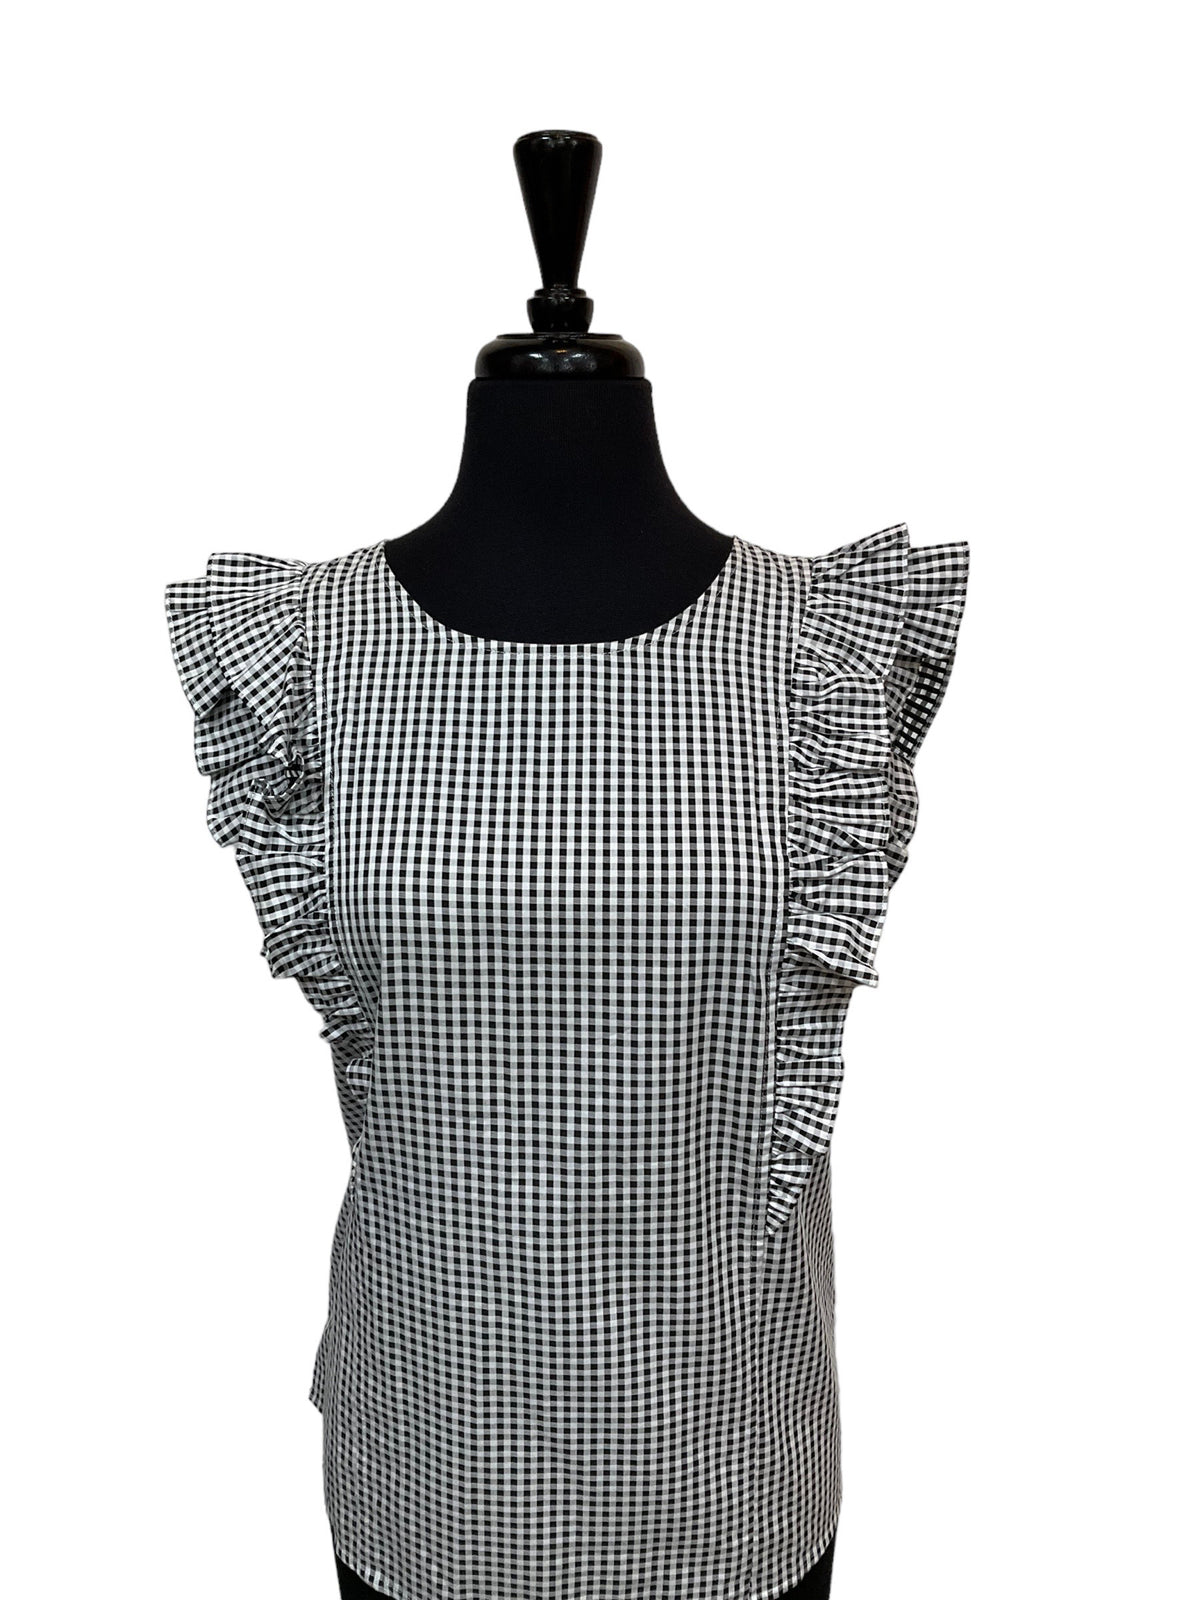 Tyler Boe Size S white/black Checkered Casual Top - Upstairs